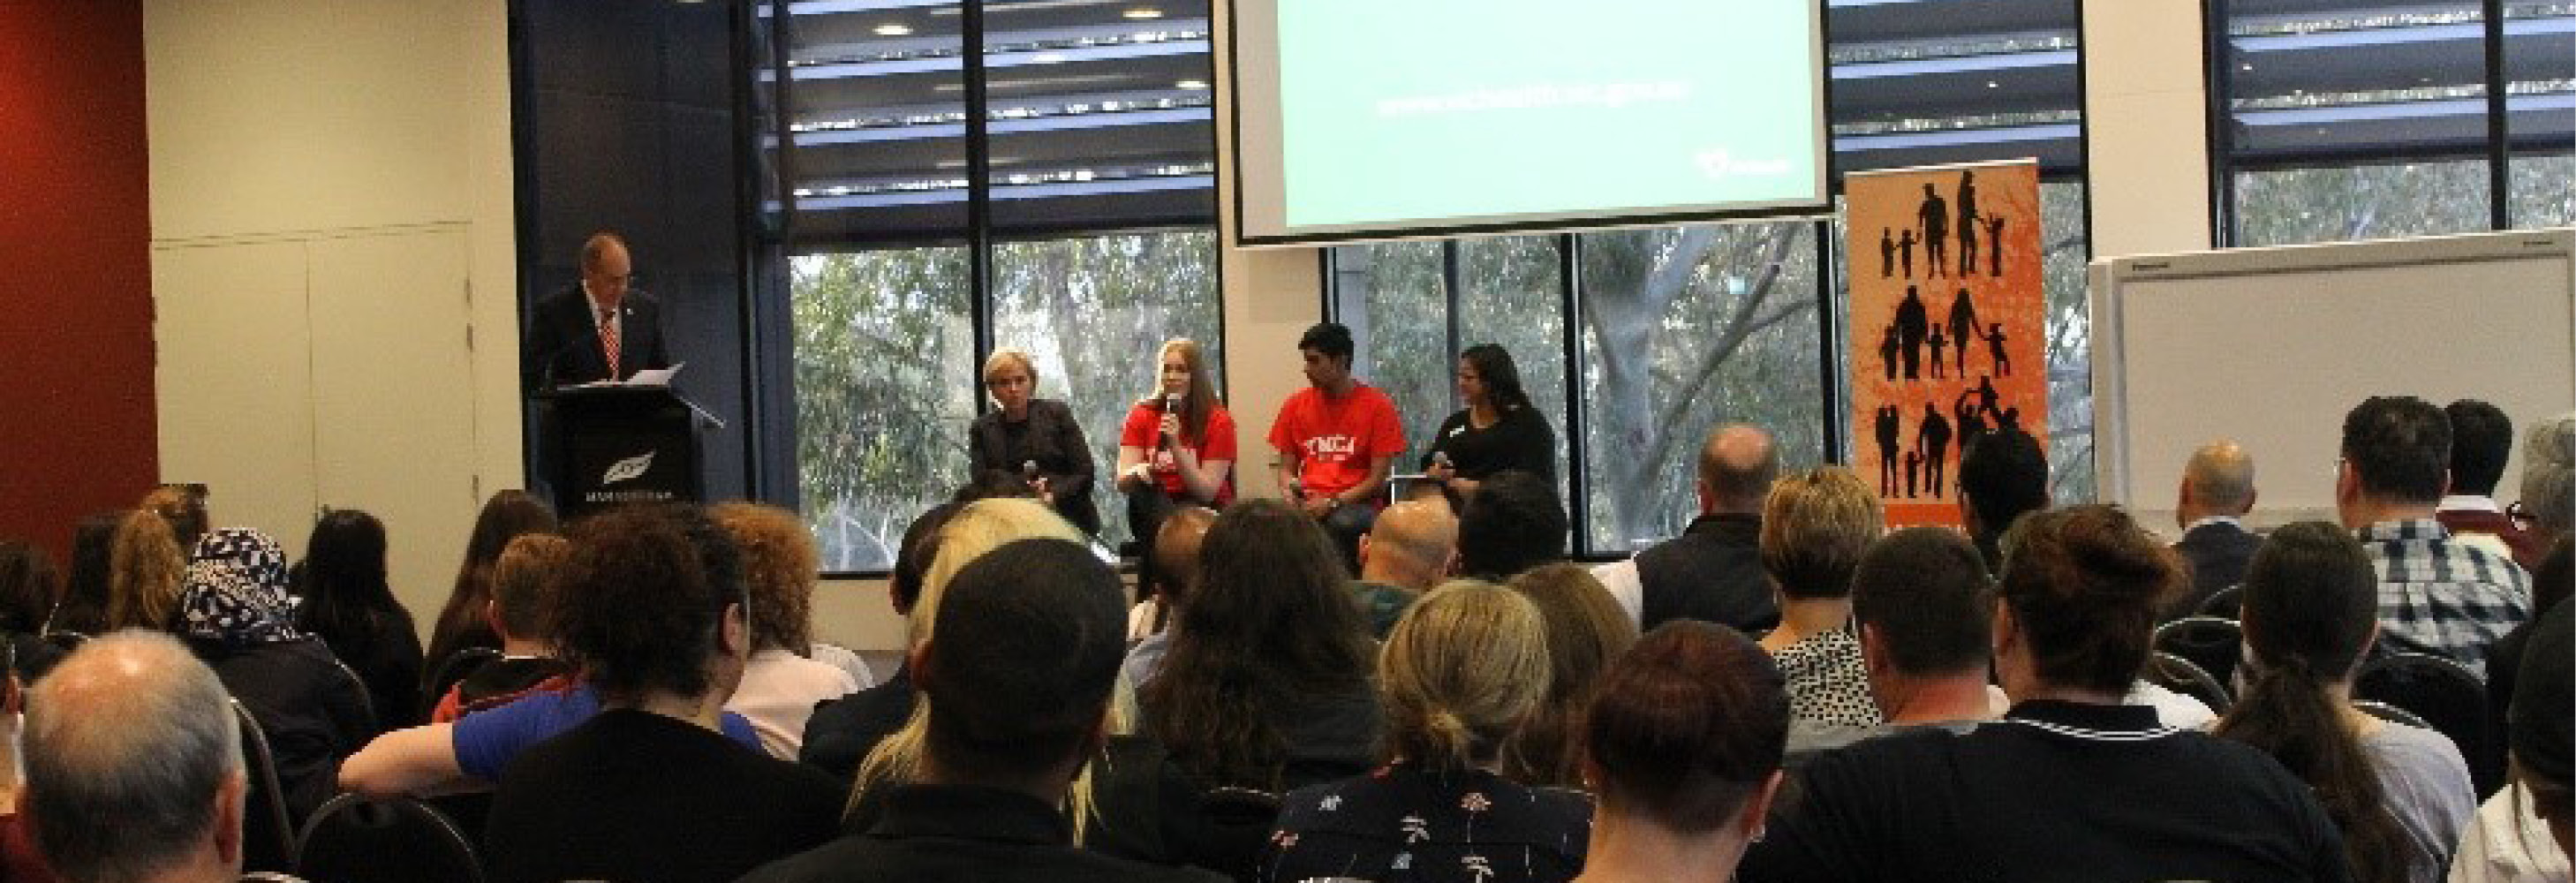 A group of people in a function room listening to a panel of people speak on stage